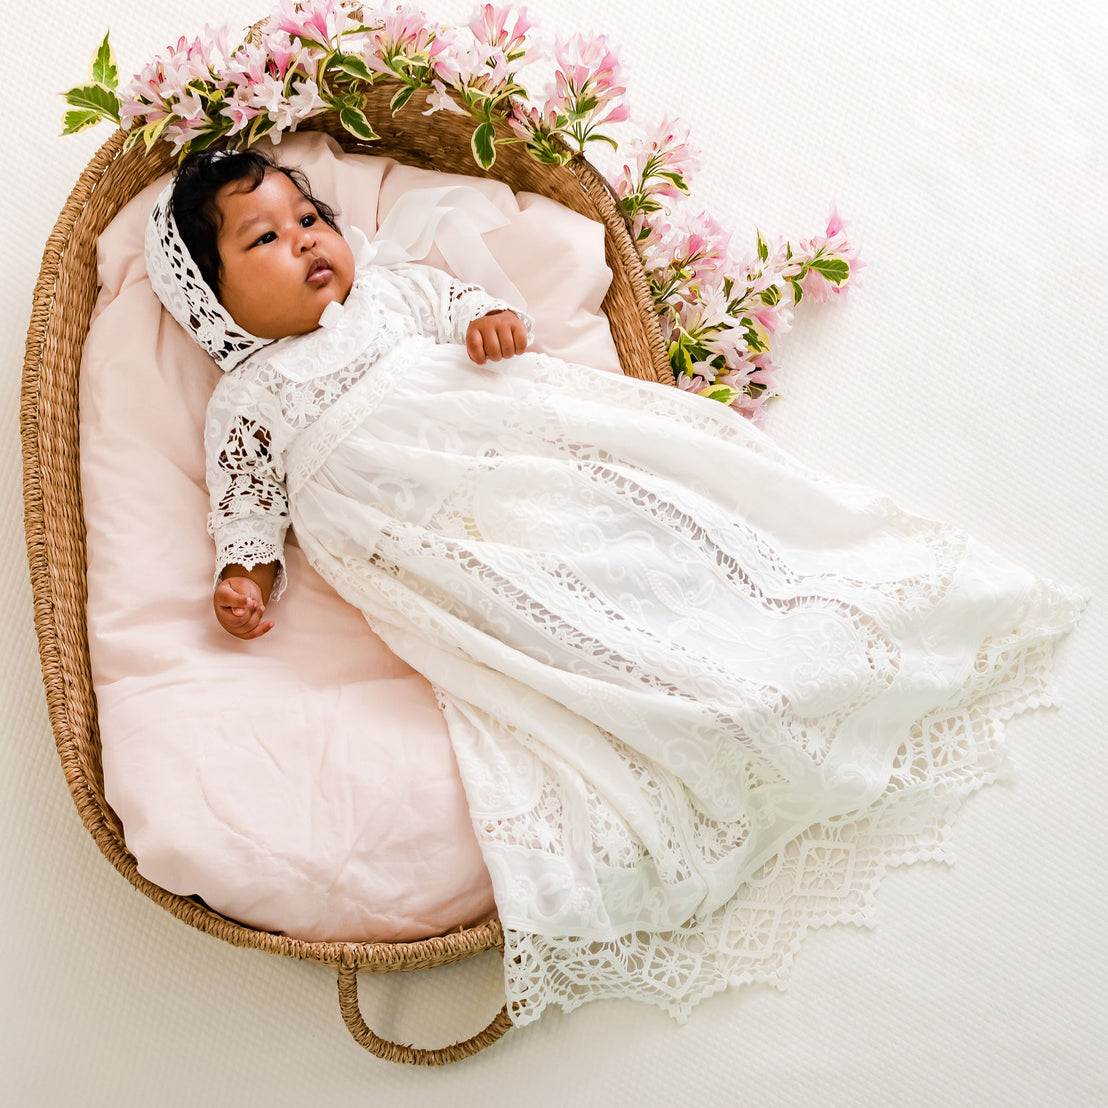 A baby in the Adeline Newborn Lace Dress or Gown & Bloomers, adorned with upscale baby jewelry, lies in a woven basket, surrounded by pink flowers, on a white background.